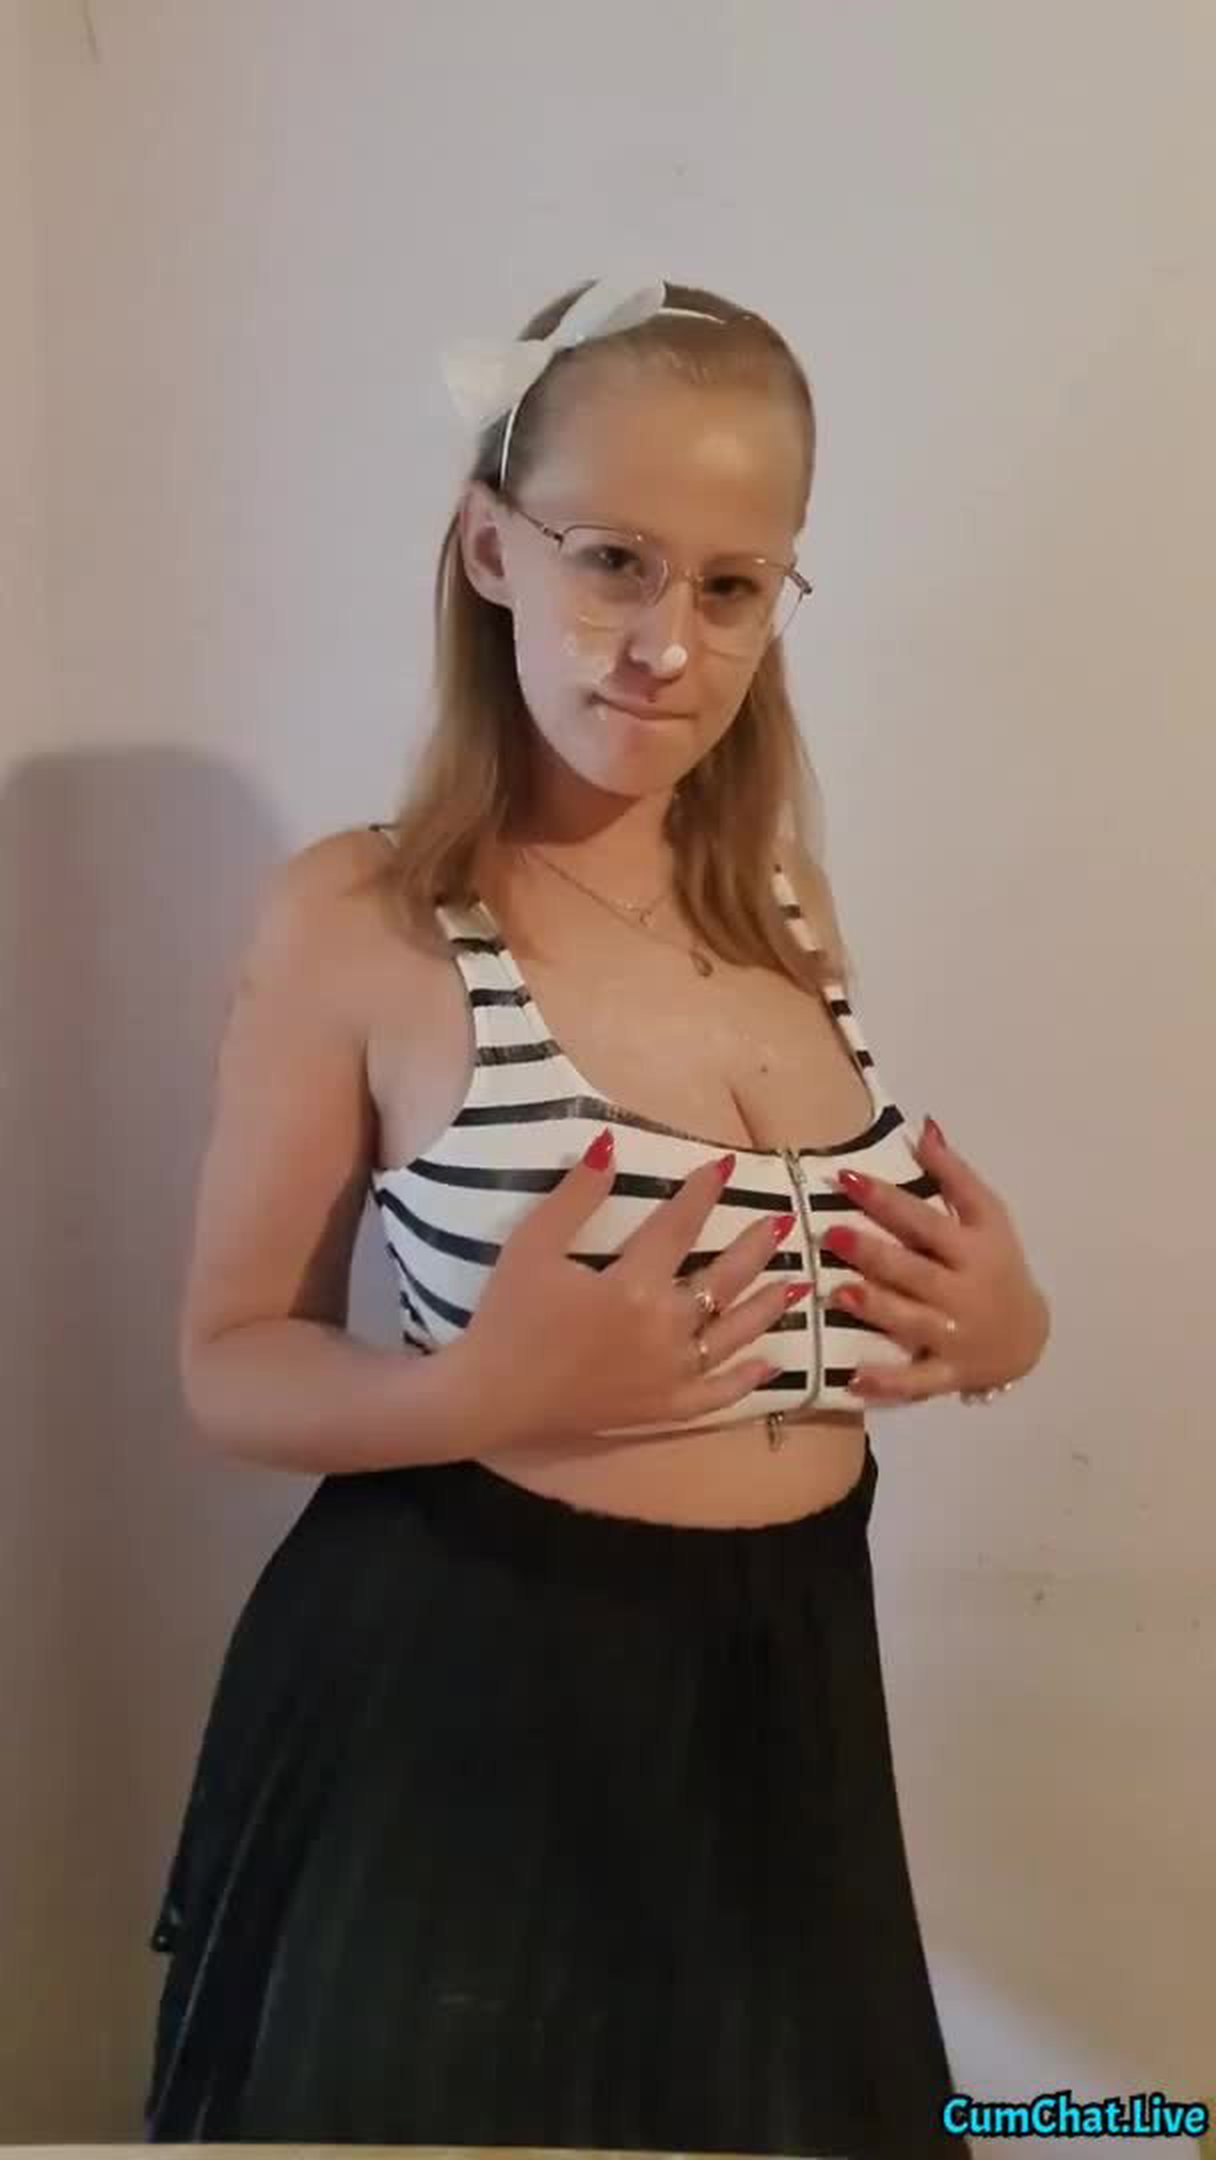 Video by CumChat.live with the username @Cumchatlive,  August 17, 2022 at 7:10 AM. The post is about the topic Teen and the text says 'Hope you’re hungry! #bigtits'